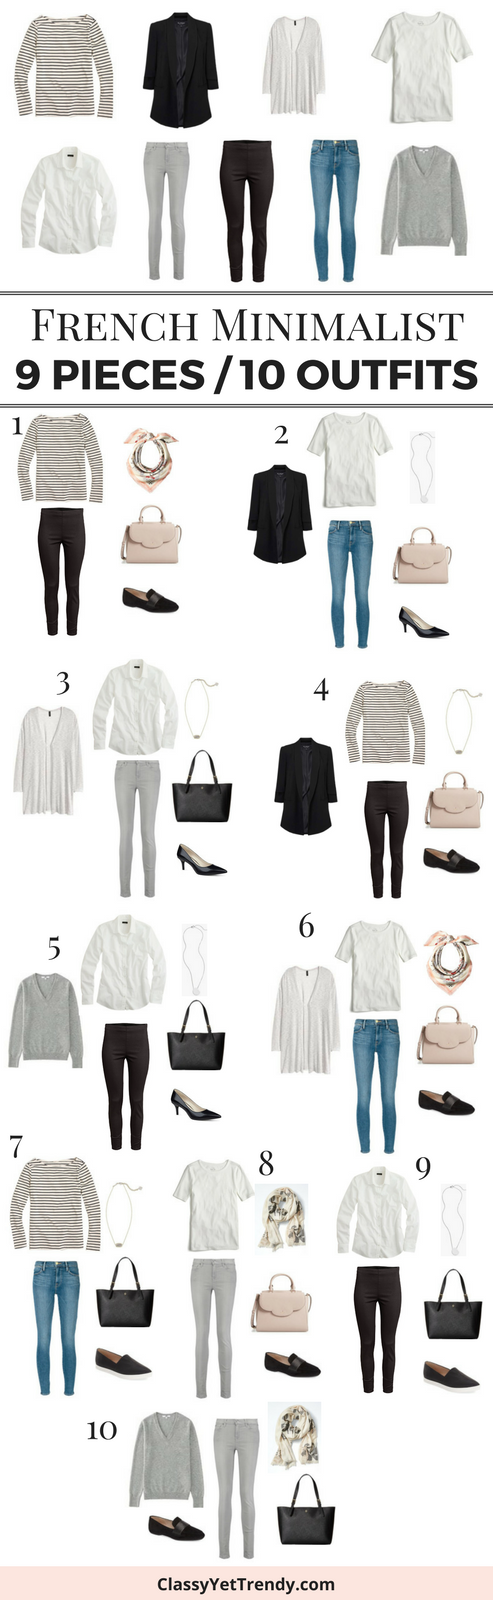 9 Pieces 10 Outfits (French Minimalist Style)